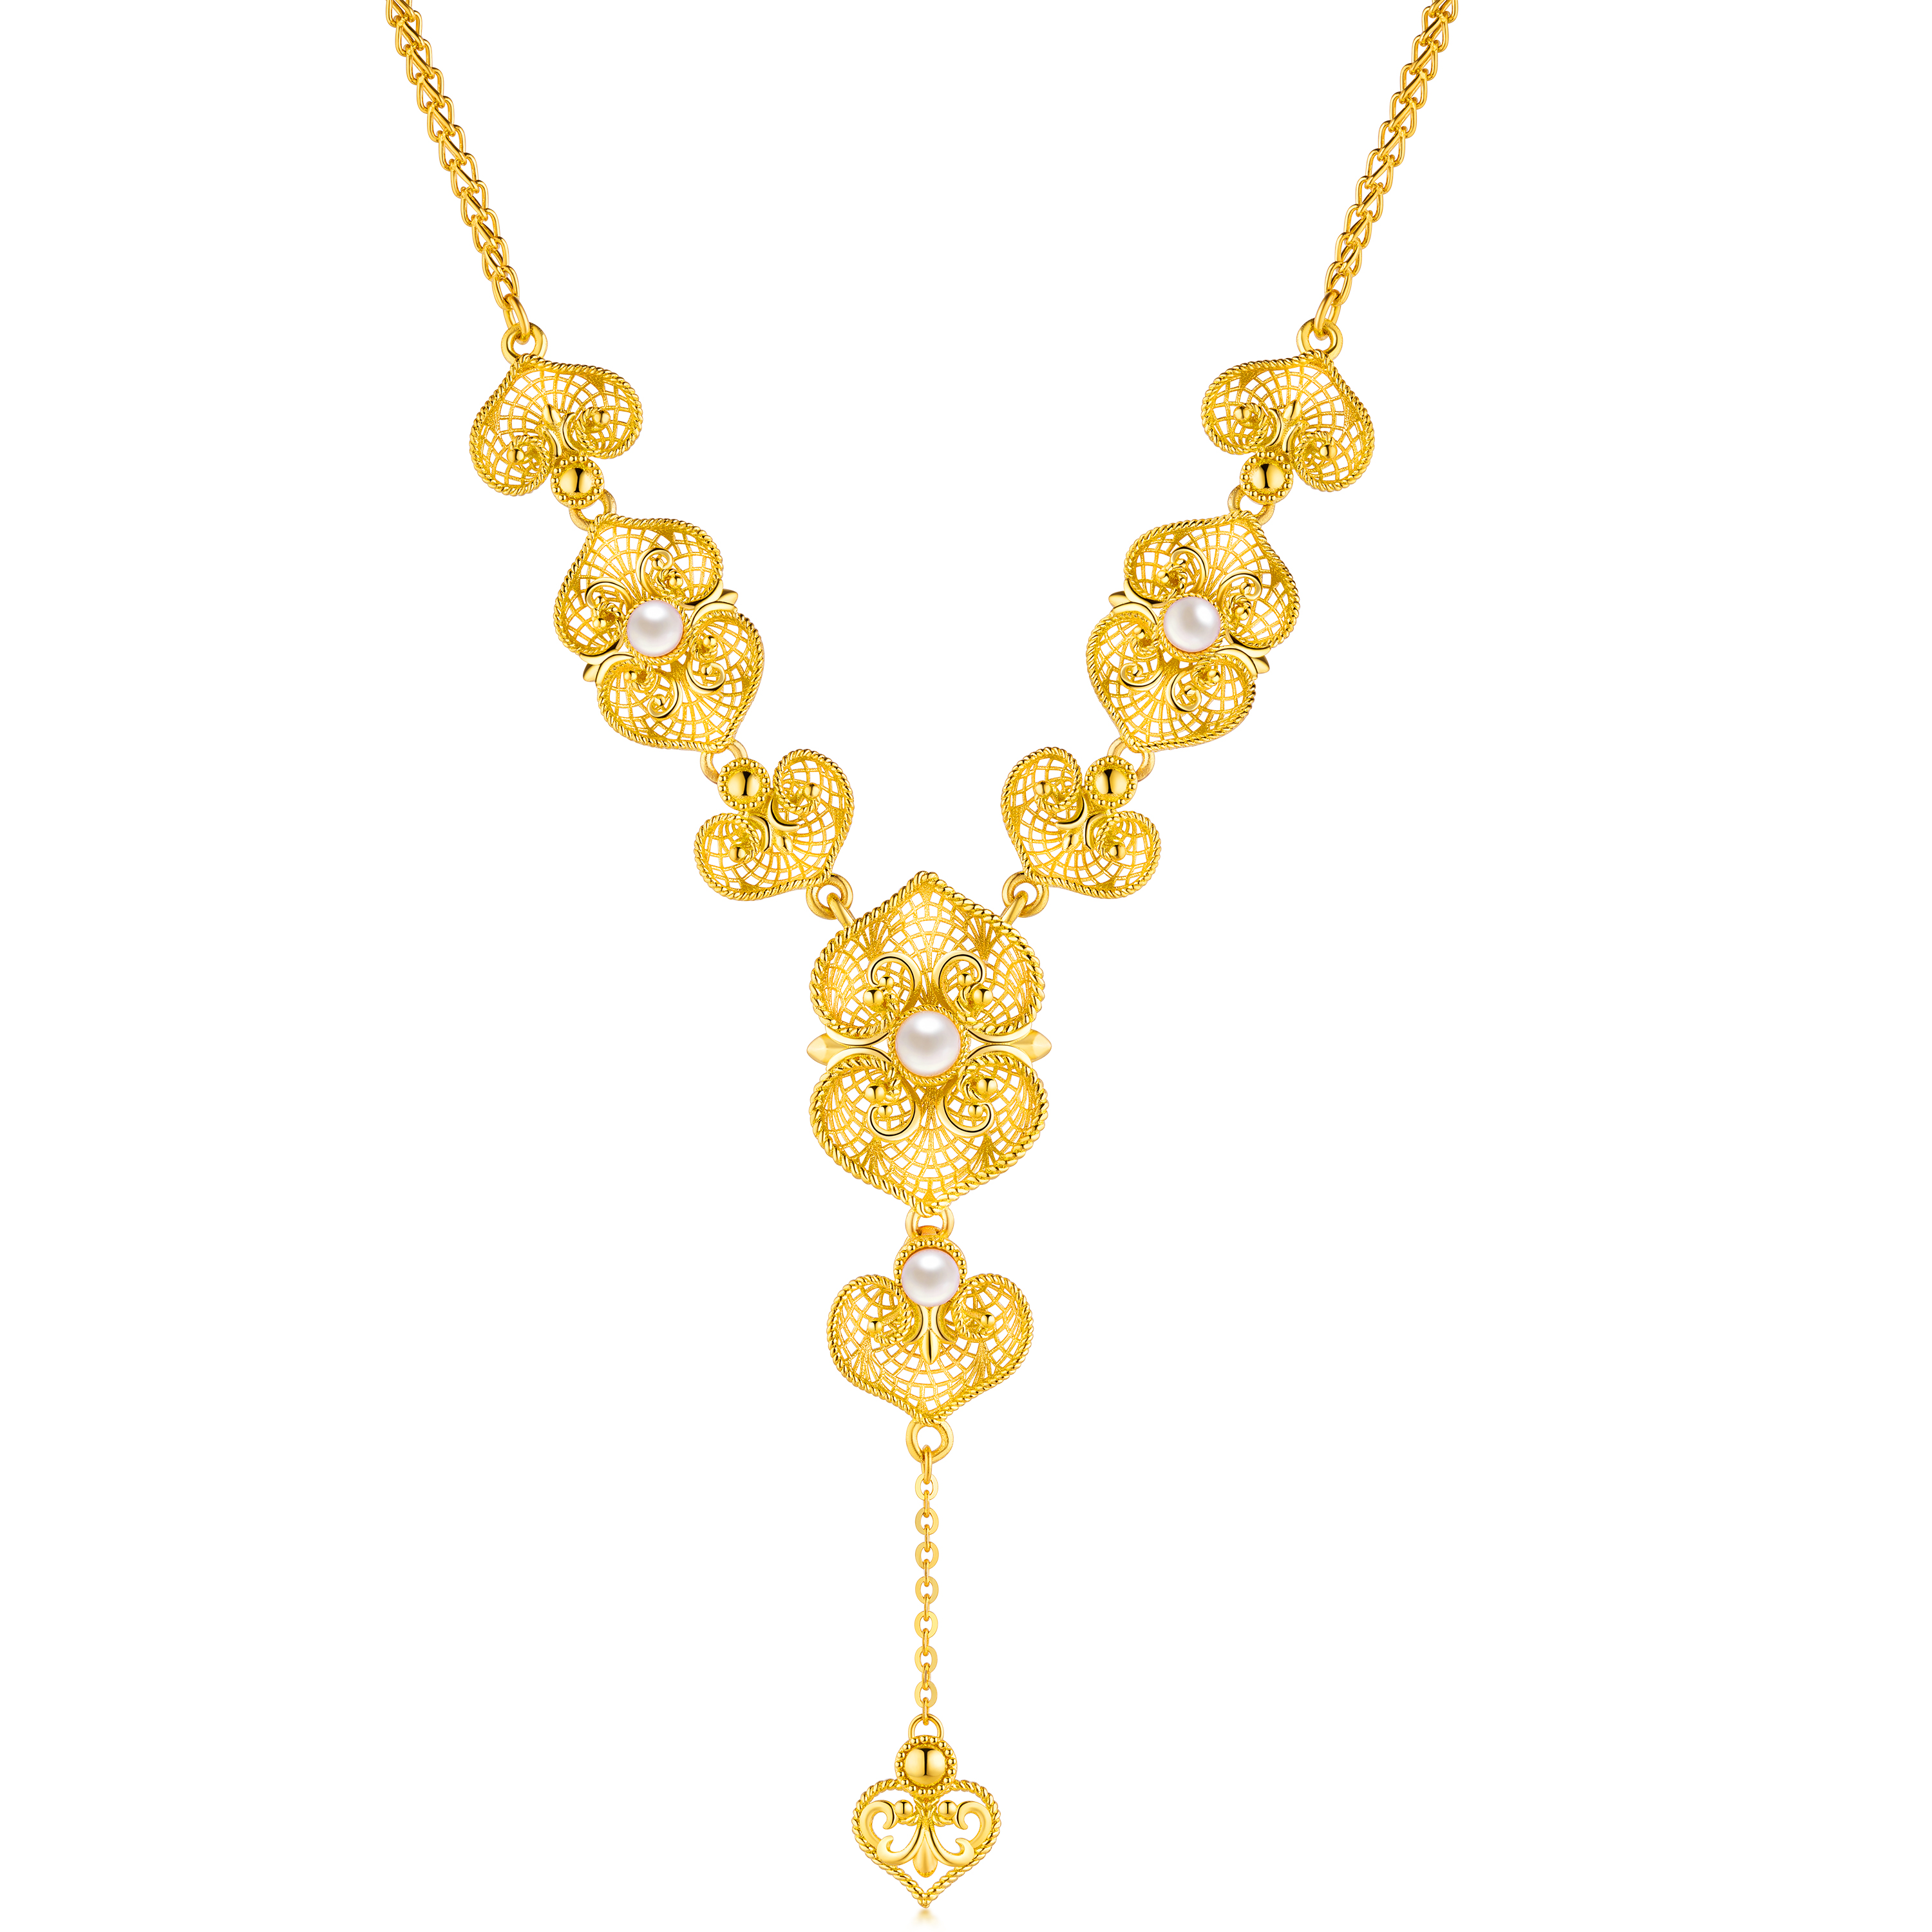 Beloved Collection "Orchid with Hope" Gold Pearl Necklace 